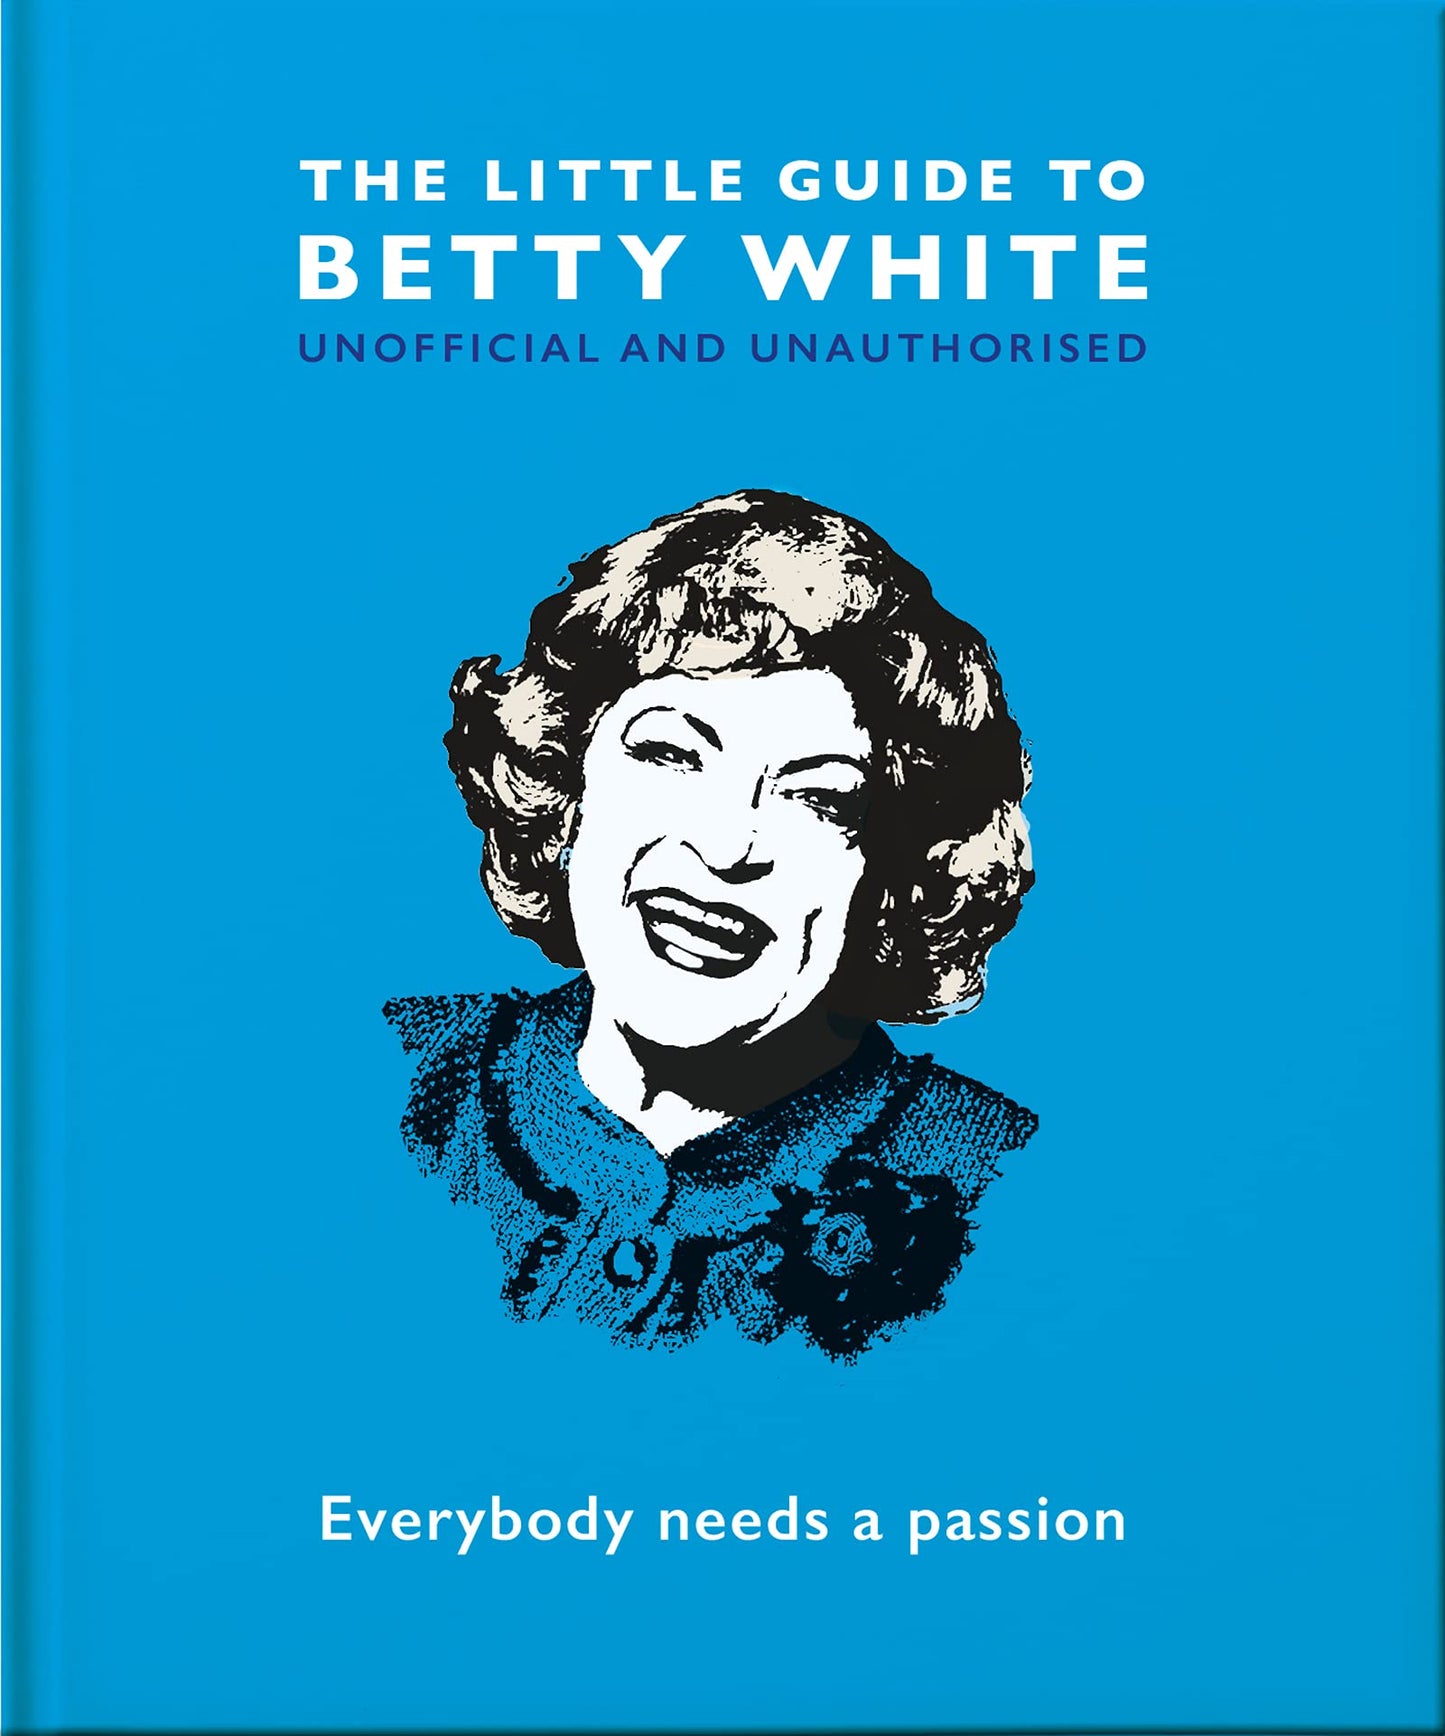 front cover of book is bright blue with black and white illustration of betty's bust and title of book is white